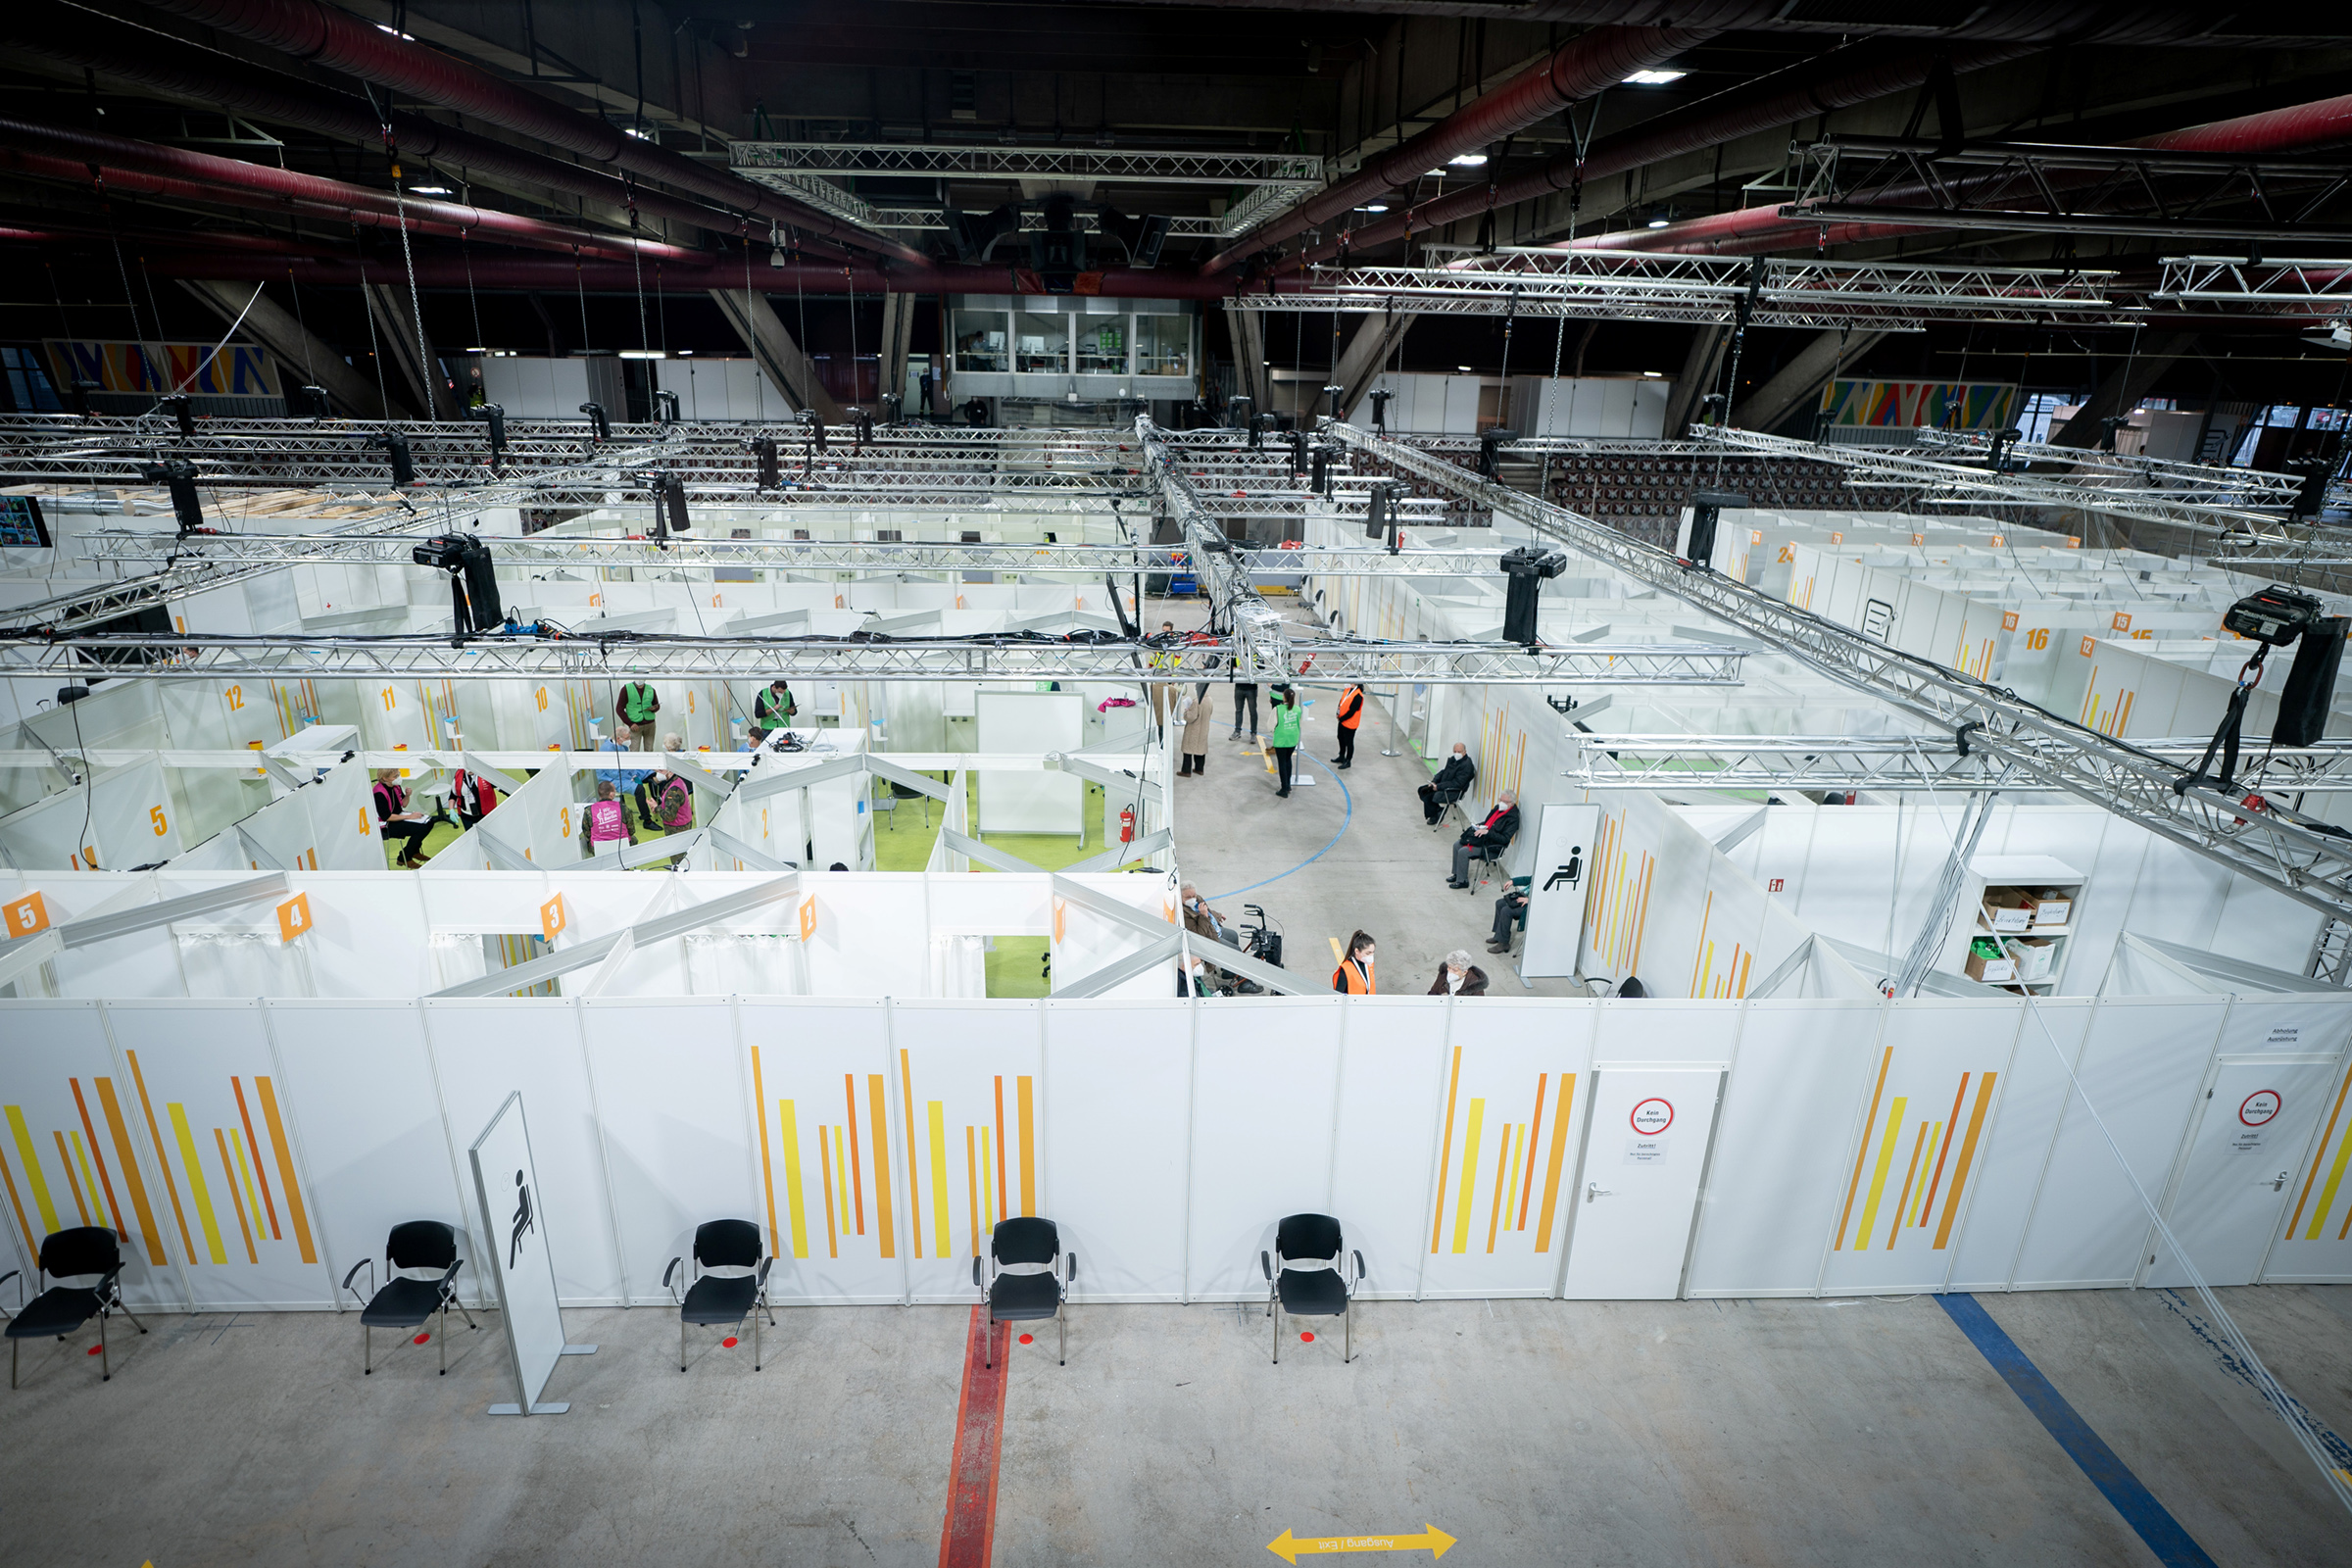 A view of a temporary COVID-19 vaccination center in the Erika-Hess ice stadium in Berlin on Jan. 14, 2021. (Kay Nietfeld—Pool/Reuters)